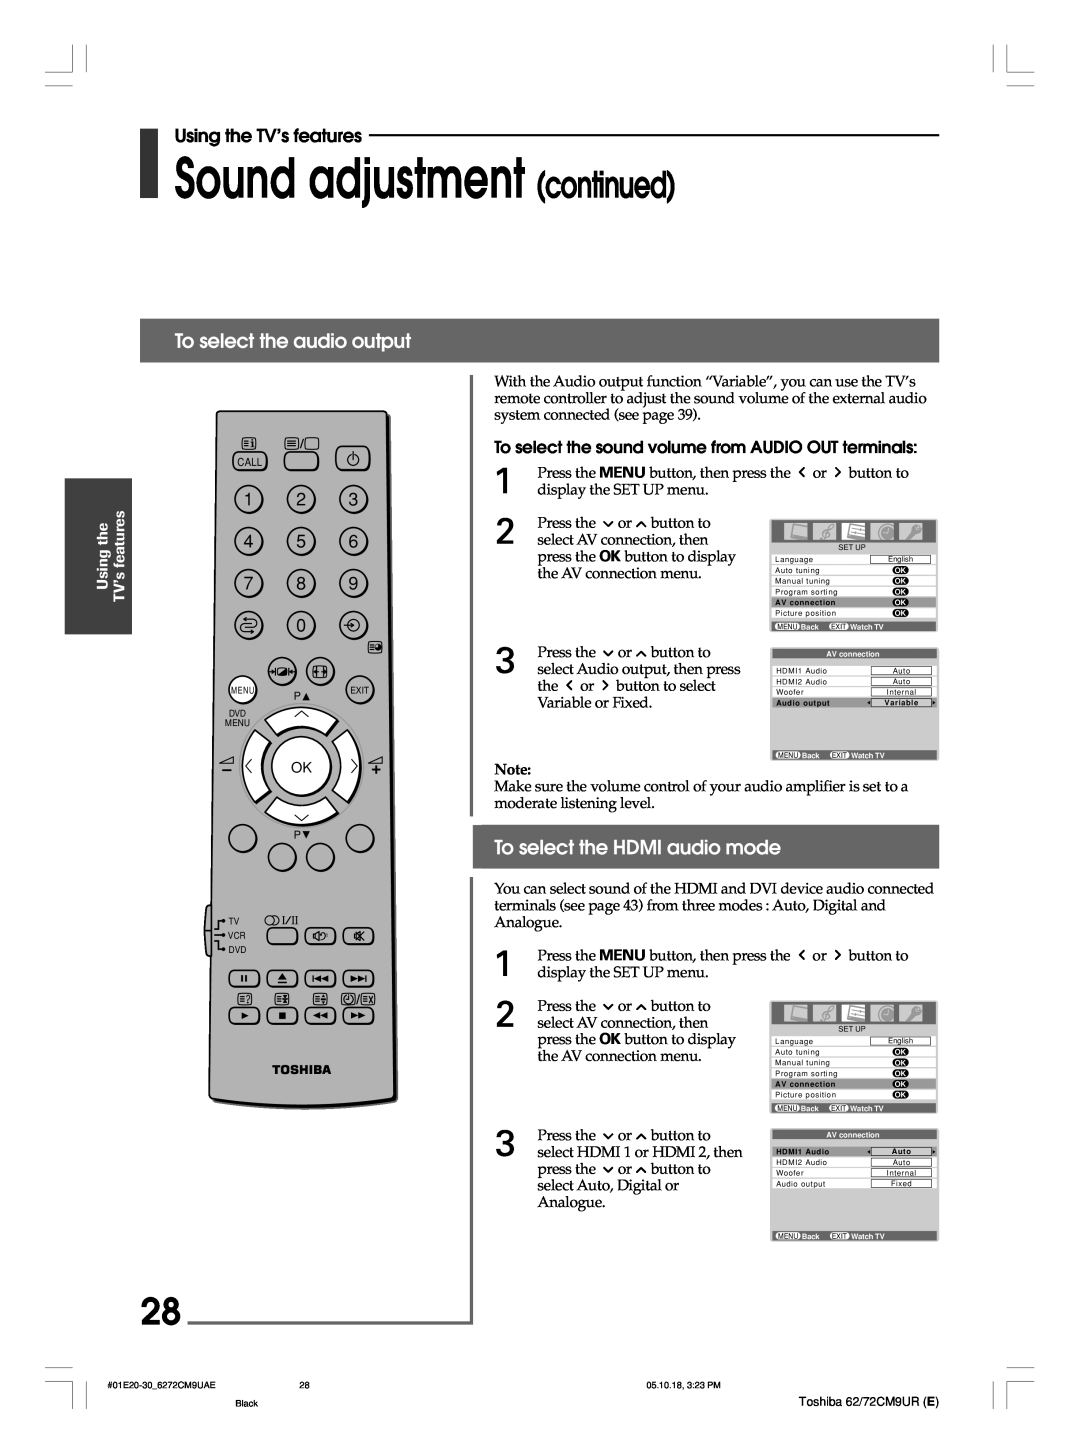 Toshiba 62CM9UA, 72CM9UE Sound adjustment continued, To select the audio output, To select the HDMI audio mode, 4 5 7 8 